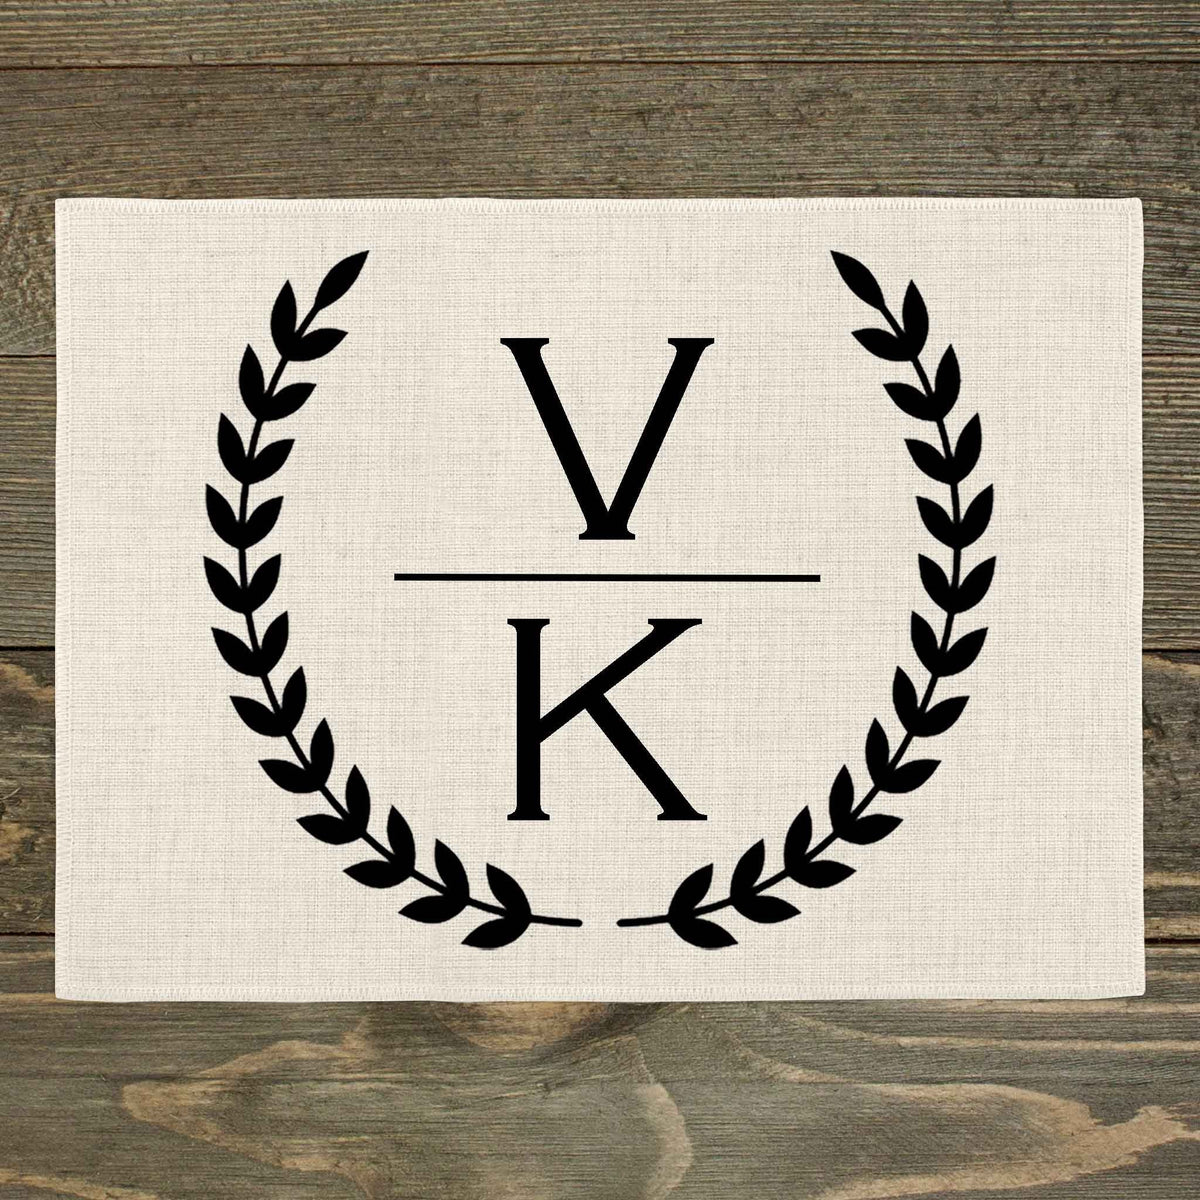 Custom Placemats | Personalized Dining and Serving | Laurel Wreath Stacked Initials